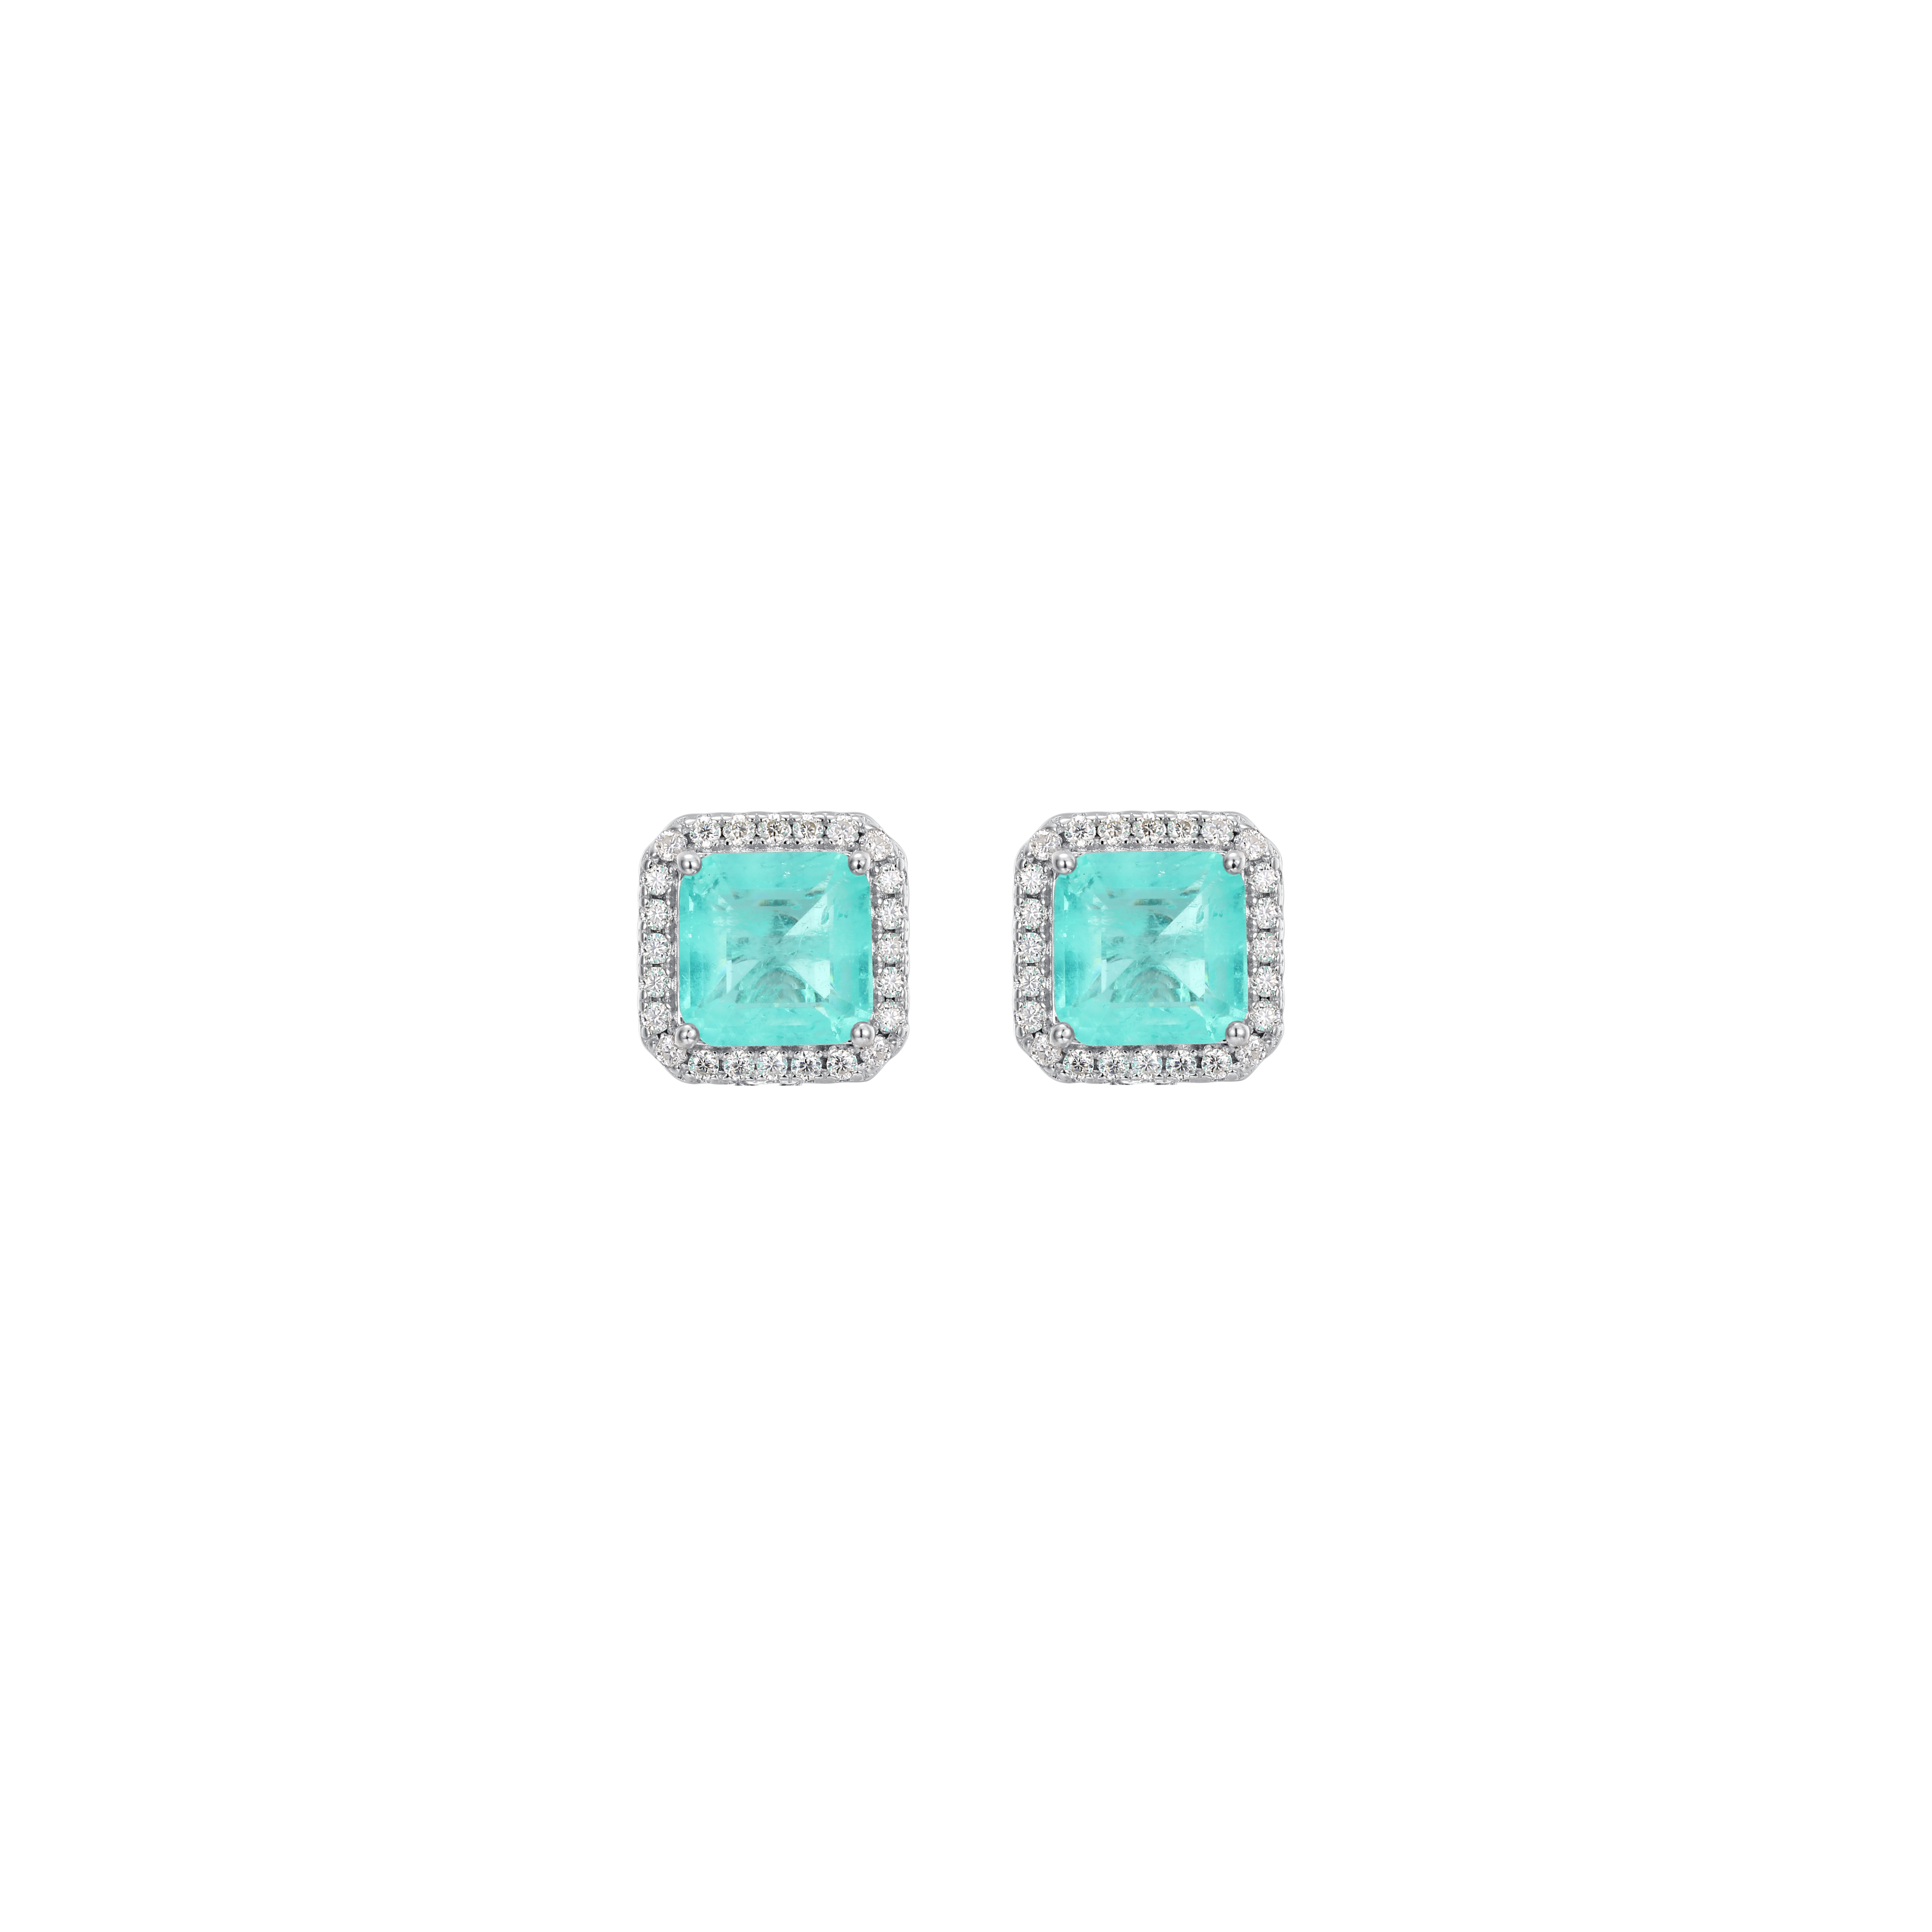 Freshwater 2 In 1 Drop and Stud Pearl Earrings with Paraiba Tourmaline and Moissanite